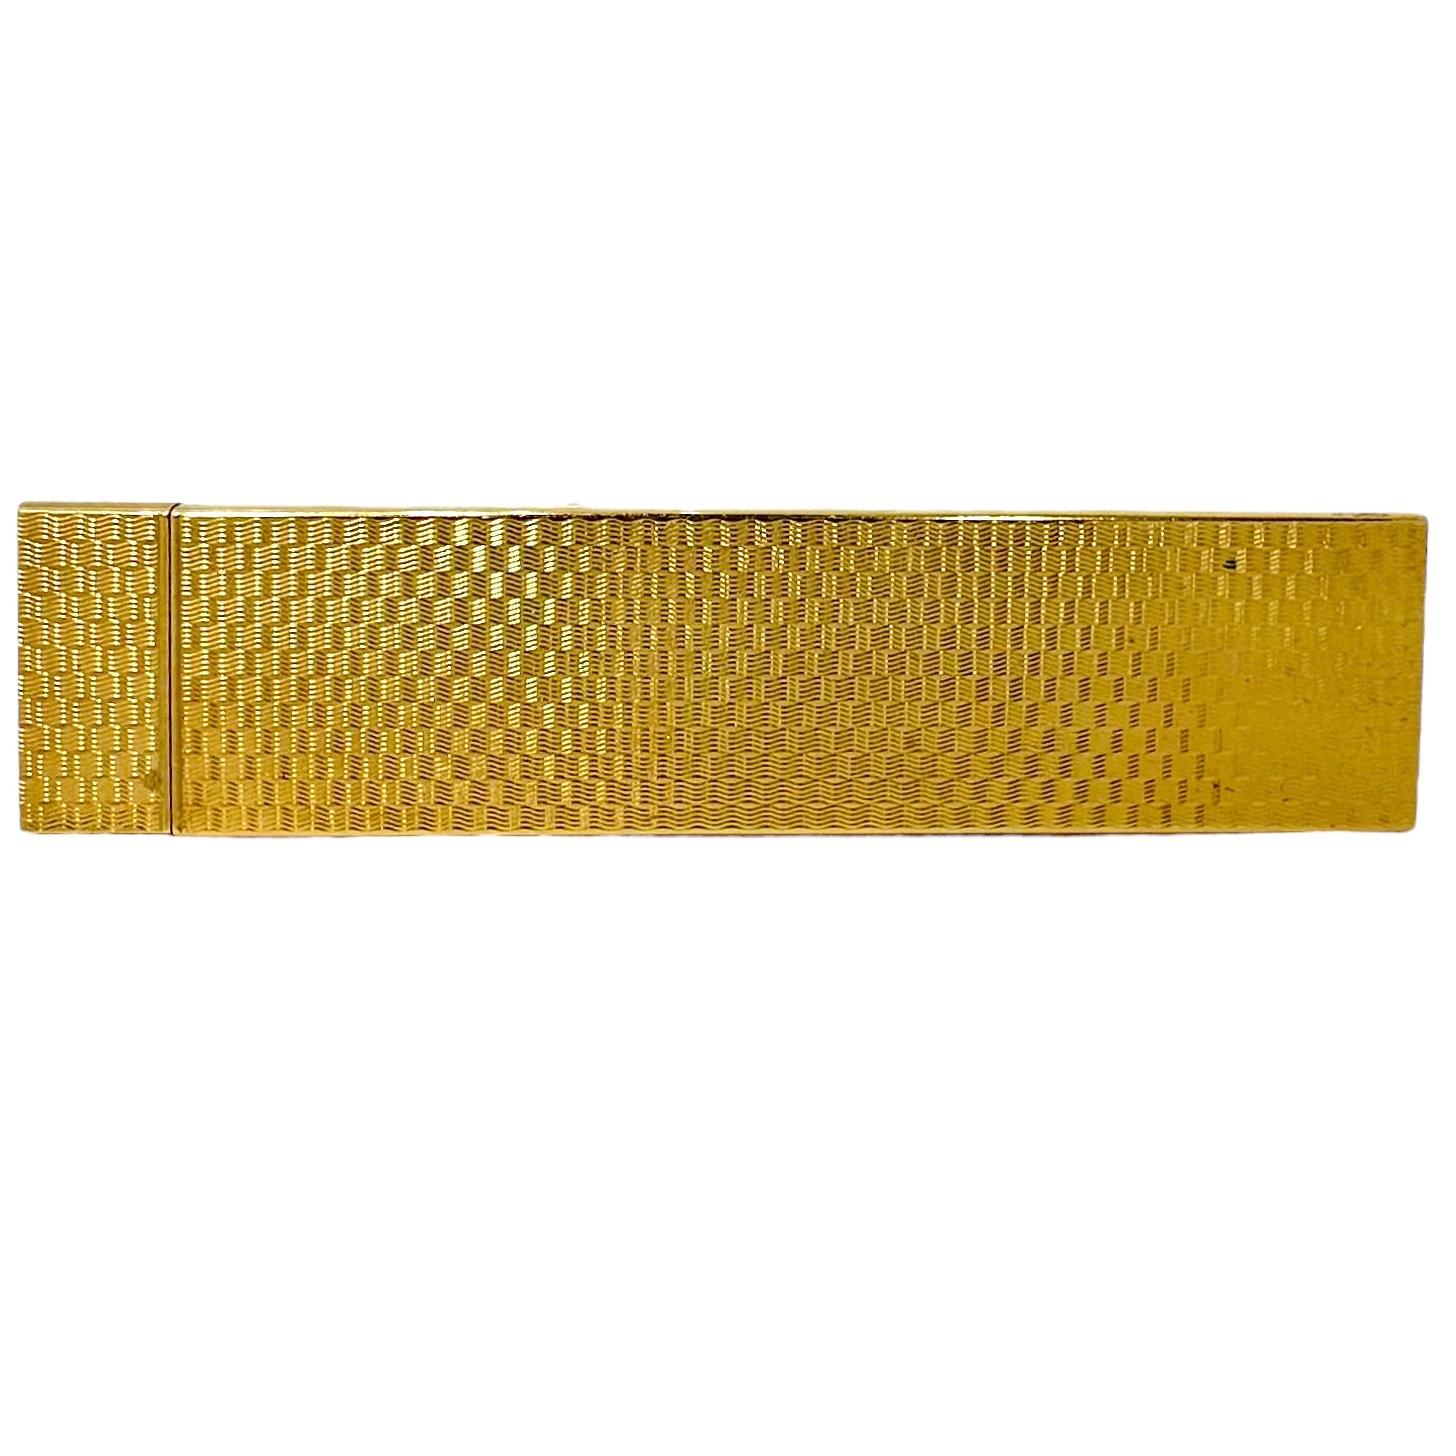 This French Cartier travel comb truly represents the epitome of personal grooming accessories from the early 20th Century. The 18k yellow gold case is finished in an undulating deeply engraved finish on both faces. All edges are high polish finish. 